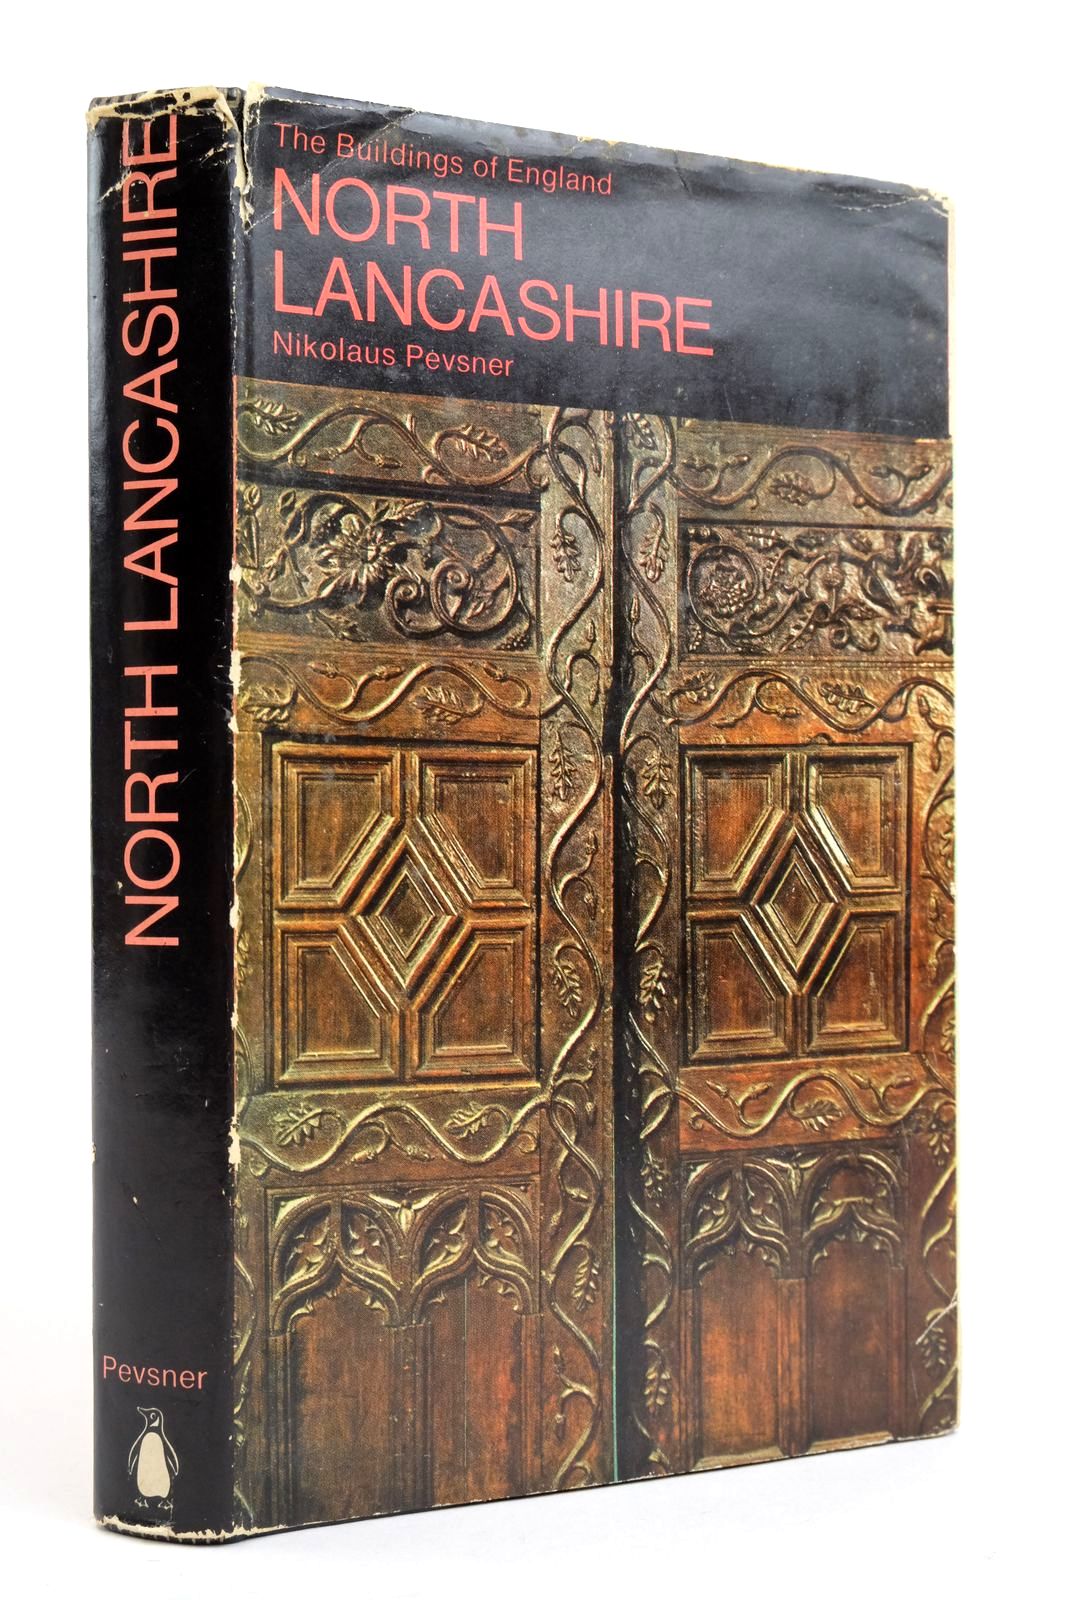 Photo of NORTH LANCASHIRE (BUILDINGS OF ENGLAND) written by Pevsner, Nikolaus published by Penguin (STOCK CODE: 2136311)  for sale by Stella & Rose's Books